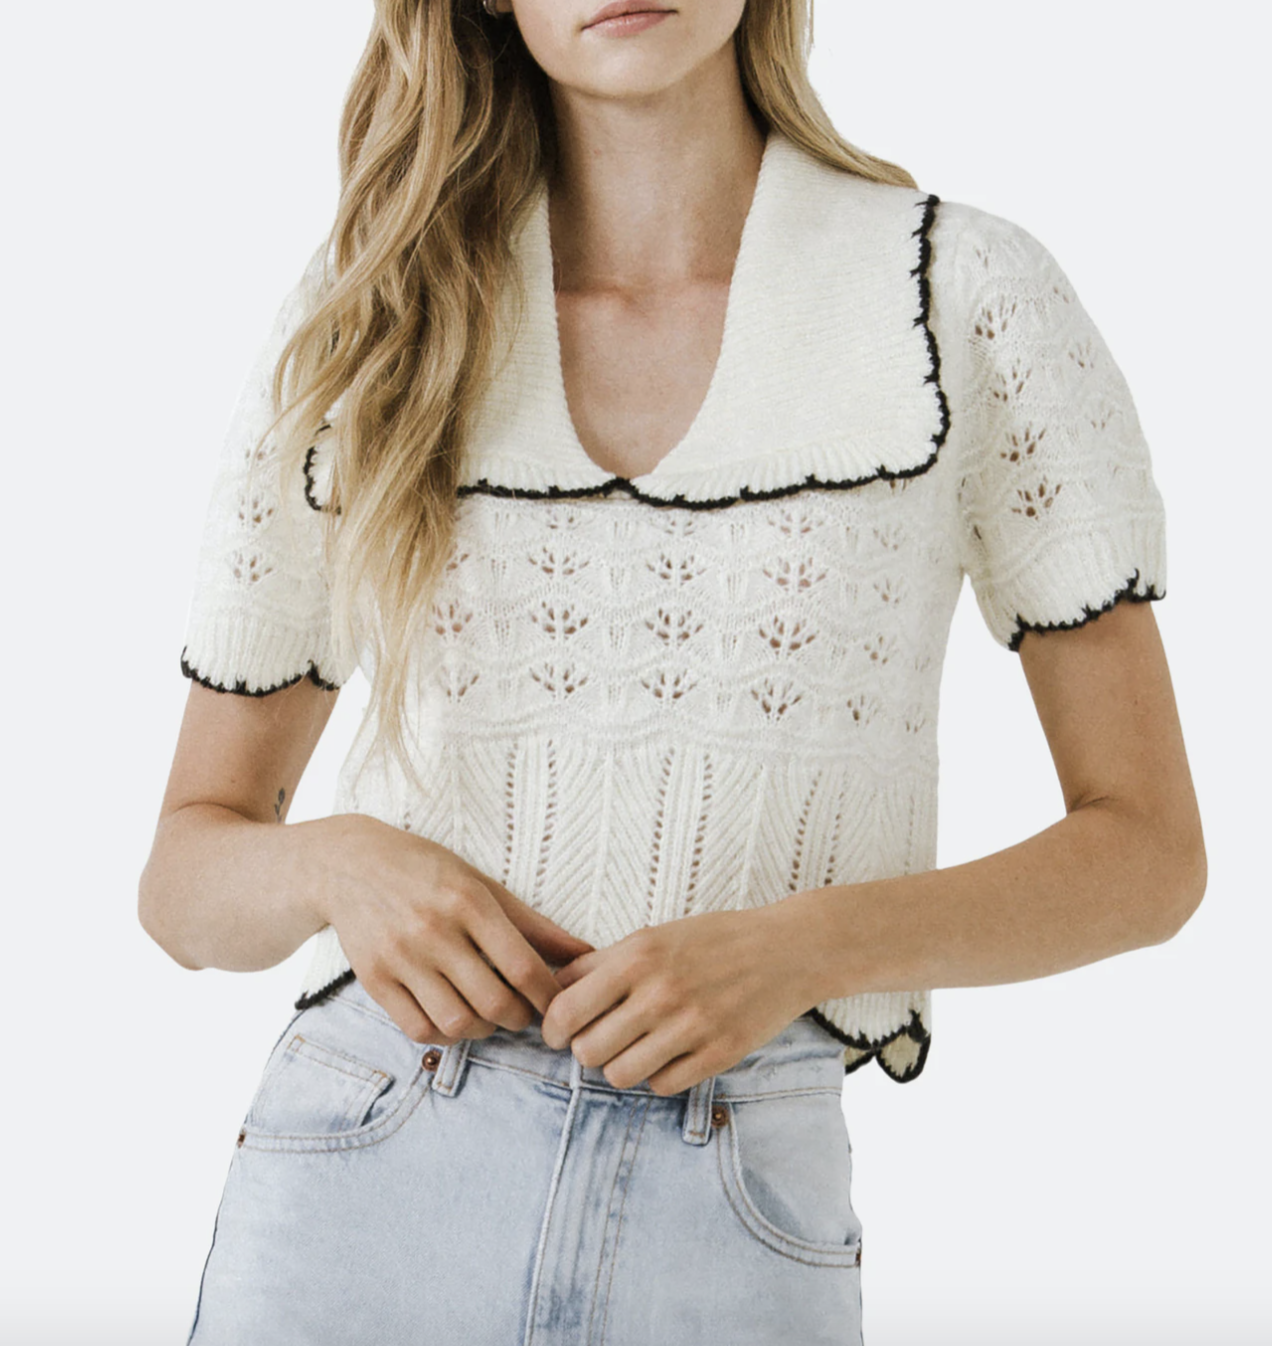 A model wearing the Short Puff Sleeve Scalloped Knit Top in white